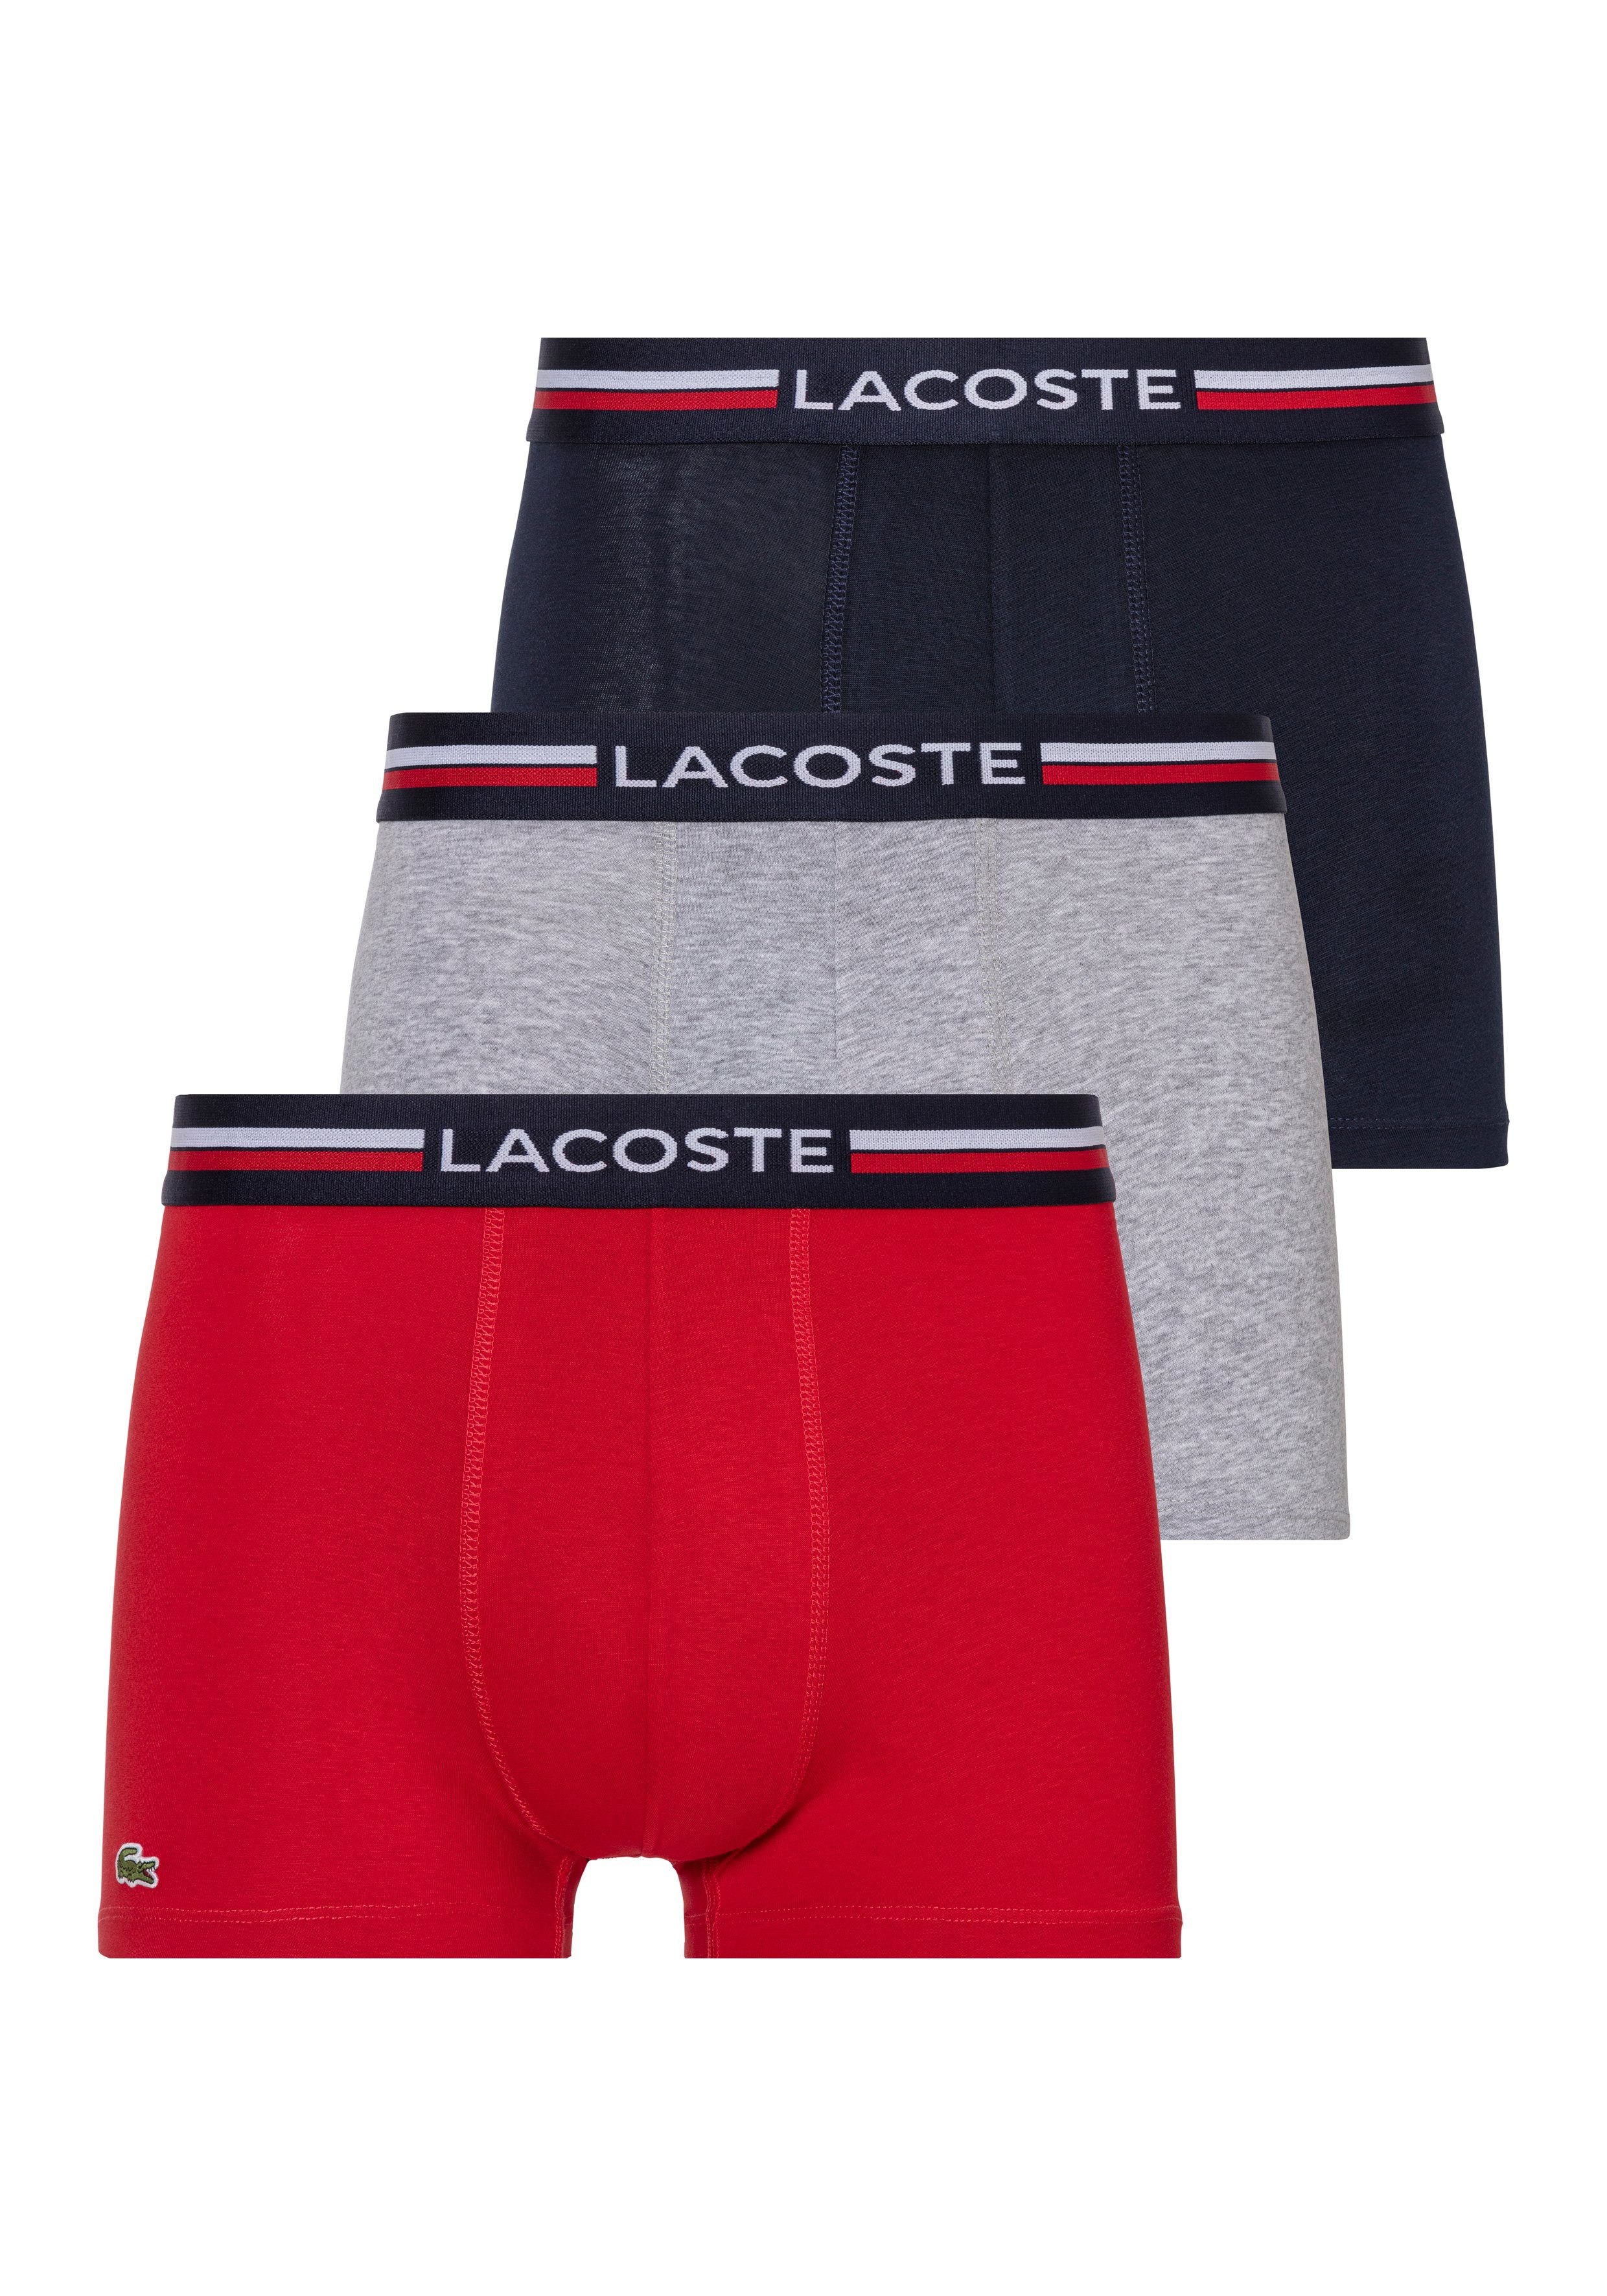 Lacoste Boxer (Packung, 3-St., 3) mit engem Bein | Boxer anliegend